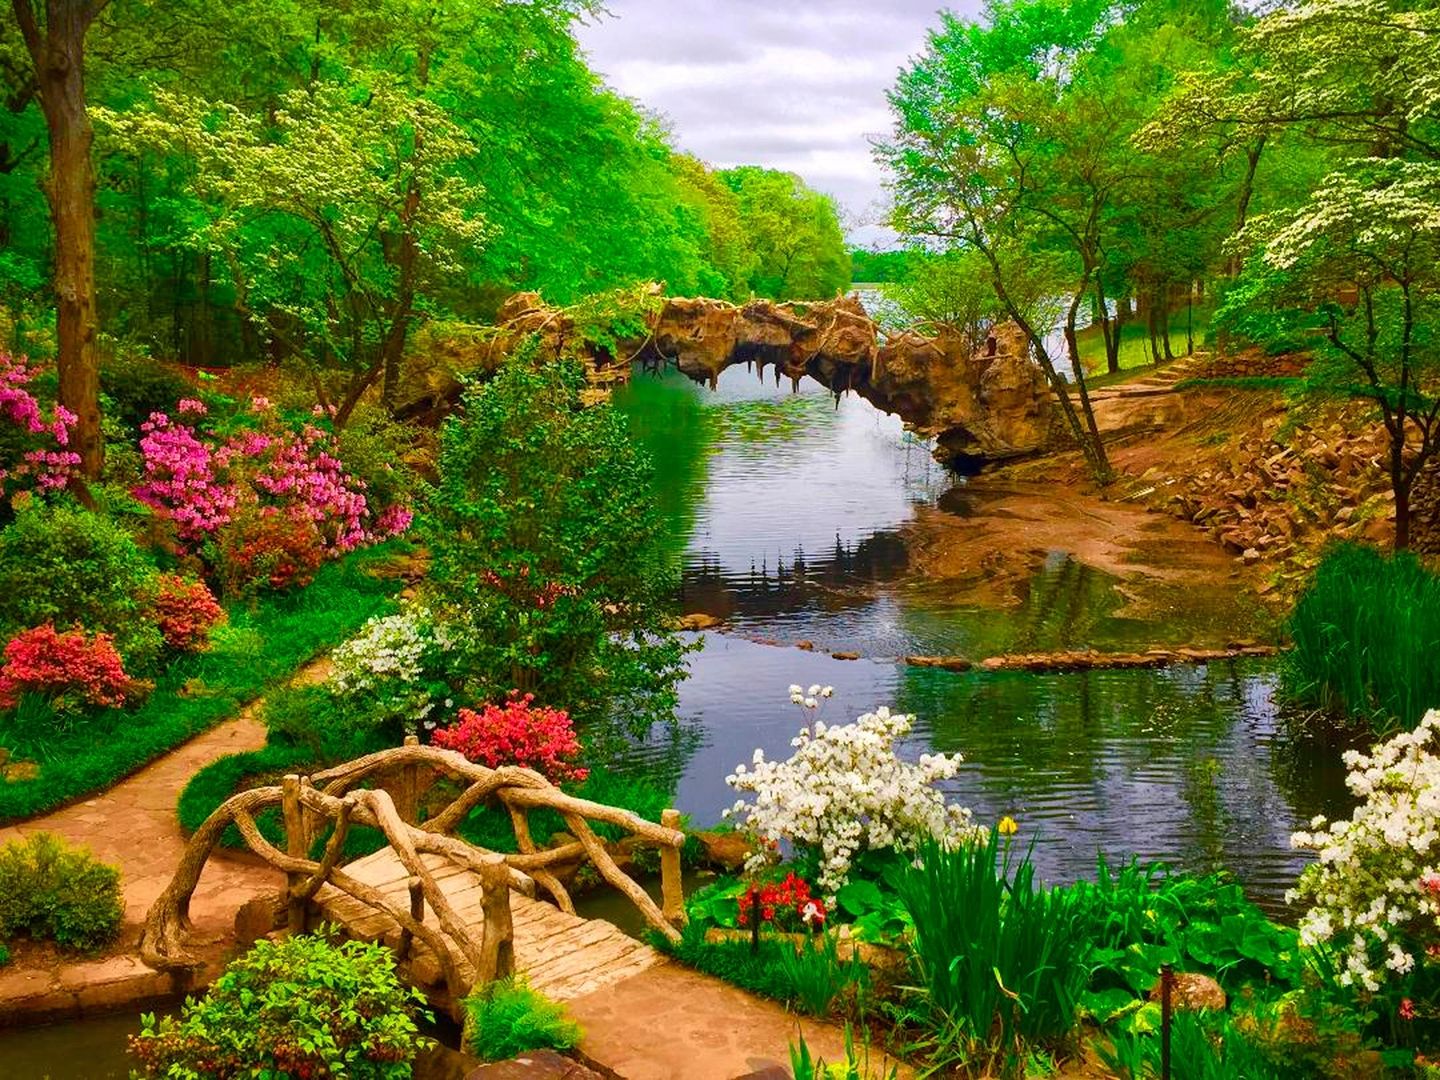 A bridge over water surrounded by trees and flowers.